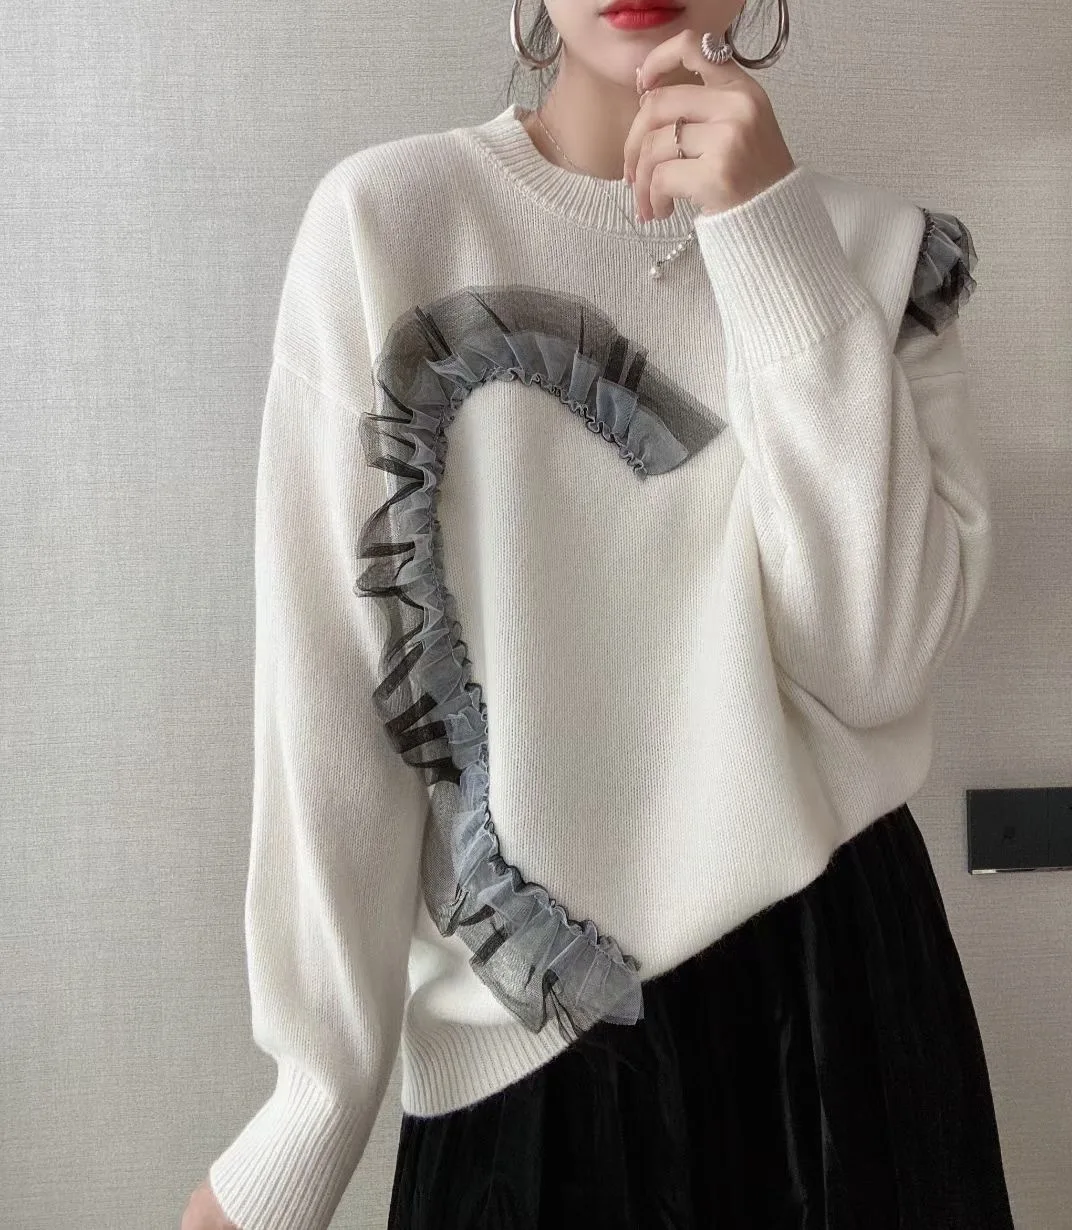 

Patchwork Mesh Edible Tree Fungus Ruffle Contrast Knit Pullover Thin Sweater Women Long Sleeve Autumn Knitted Top Fashion Casual